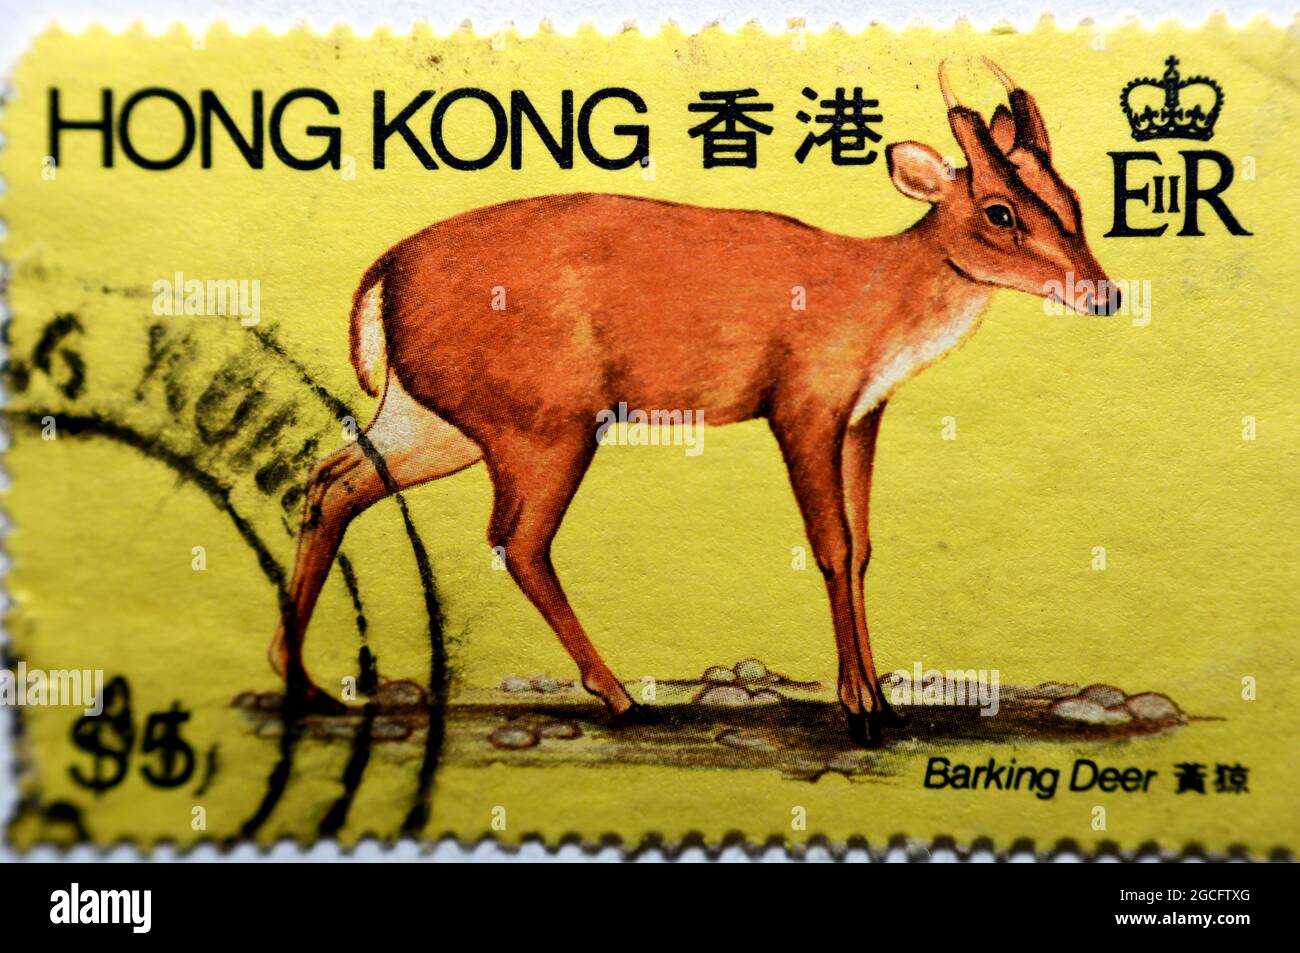 An old used postage stamp printed in Hong Kong China shows barking deer also called rib-faced deer and muntjac lives in southern China, vintage retro, Stock Photo